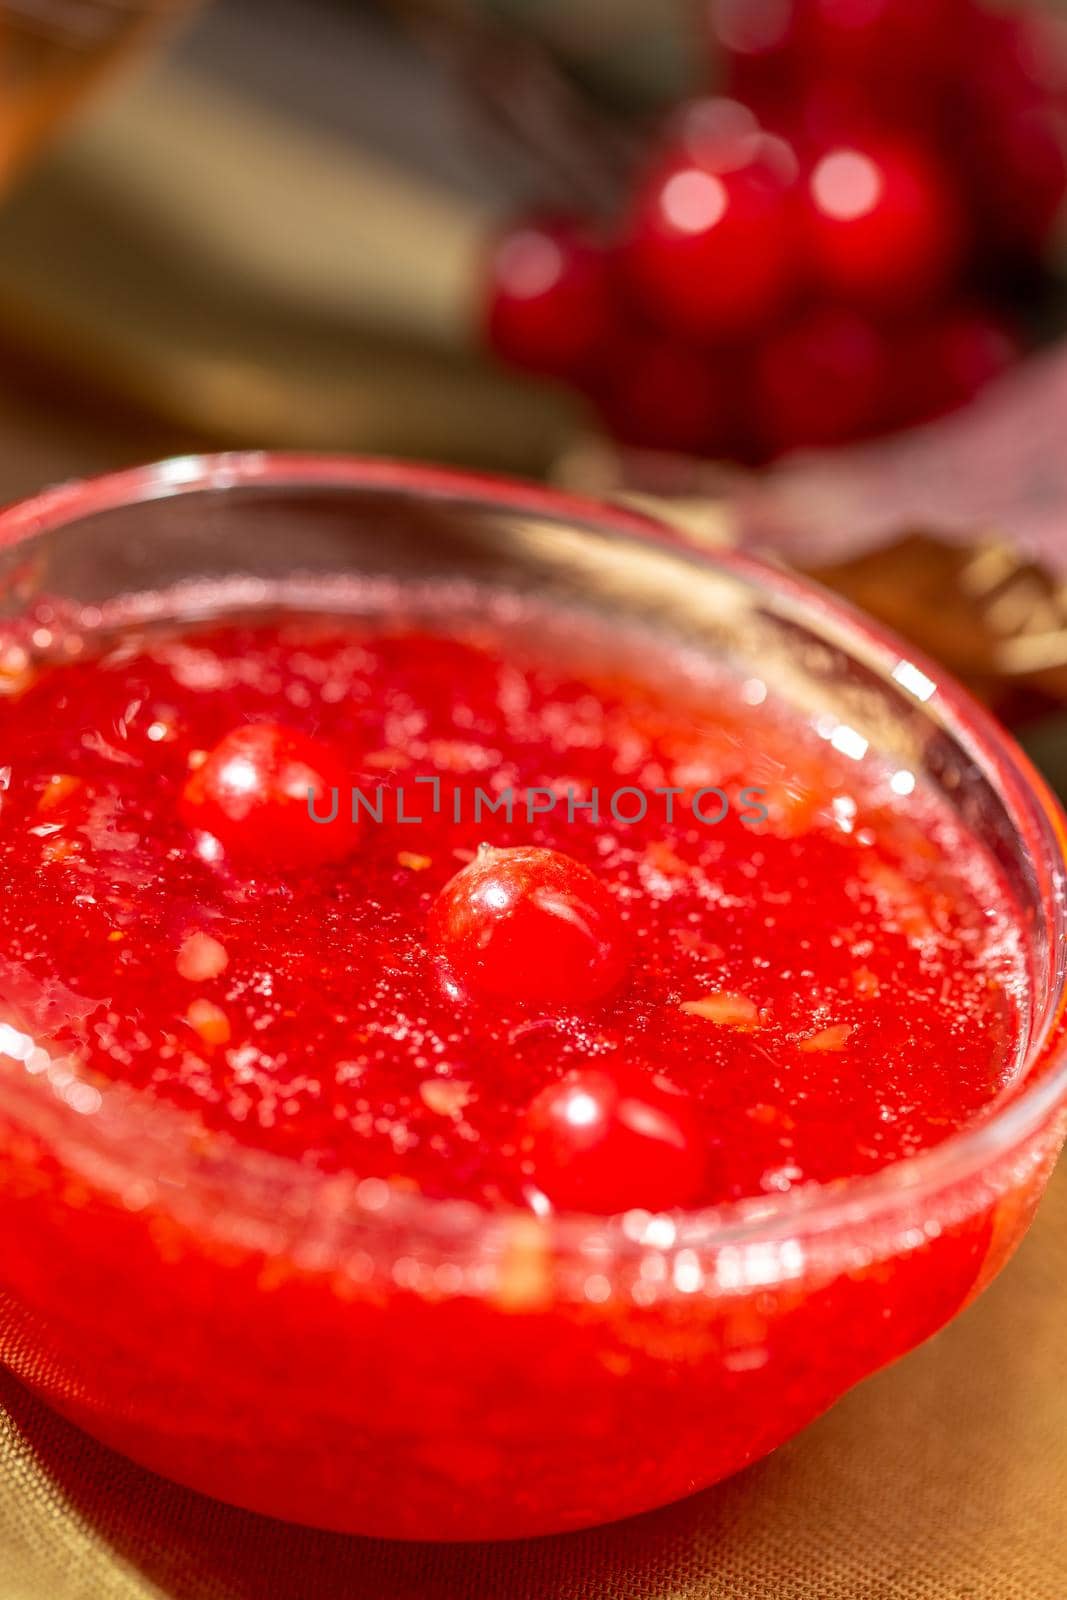 Viburnum jam in a glass bowl on the wooden table by Syvanych